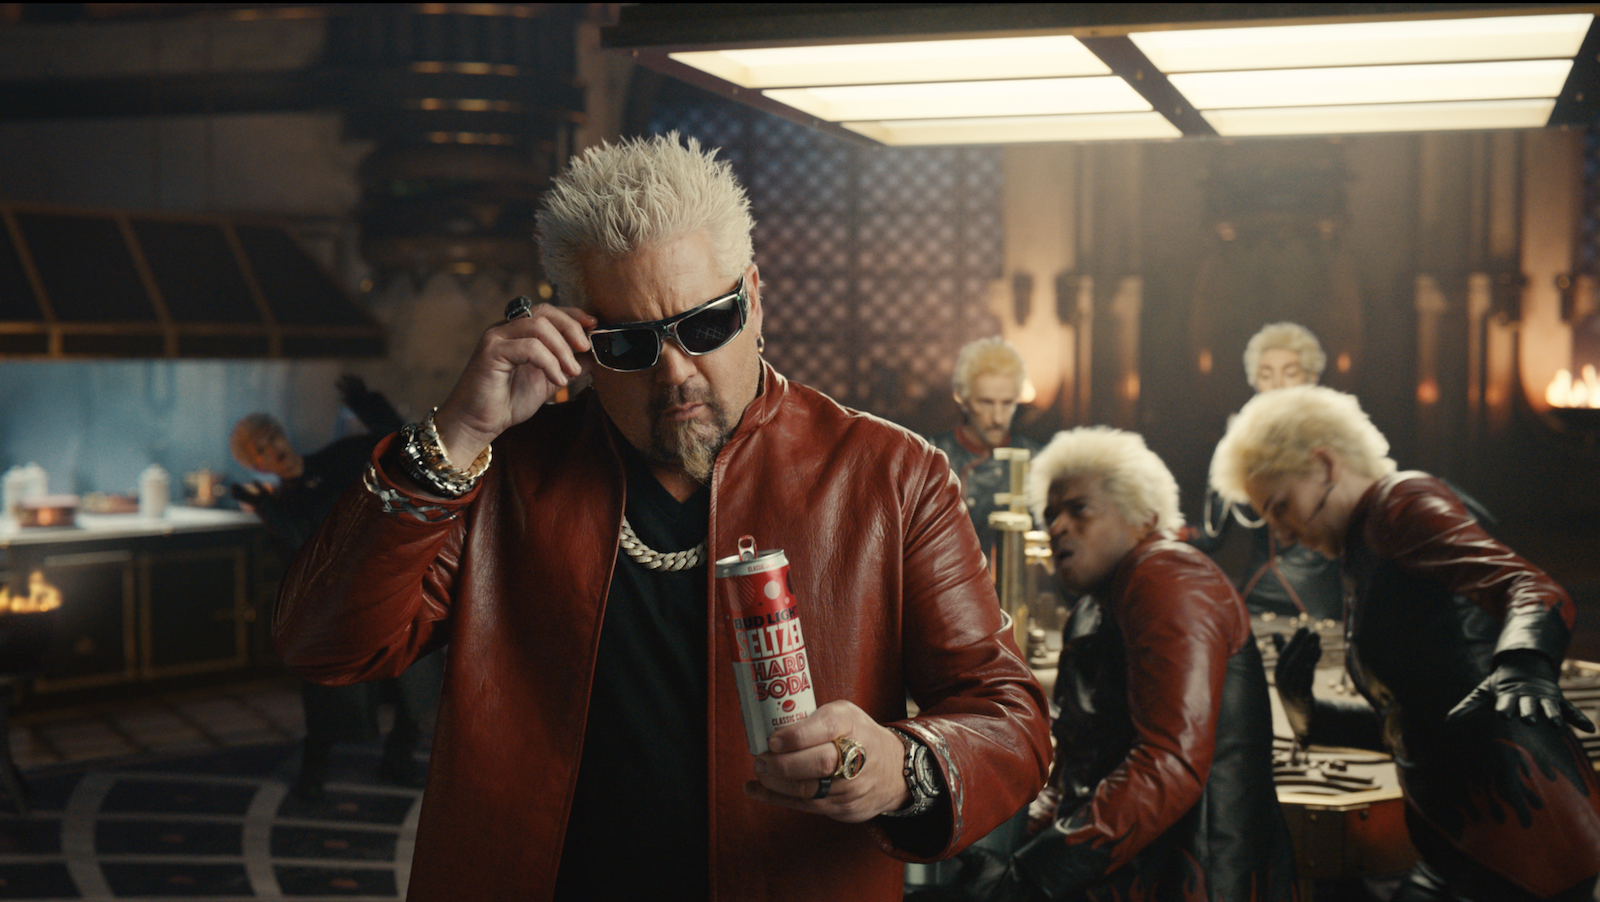 Celebrity chef Guy Fieri removes his sunglasses to check out the Bud Light Hard Seltzer Soda